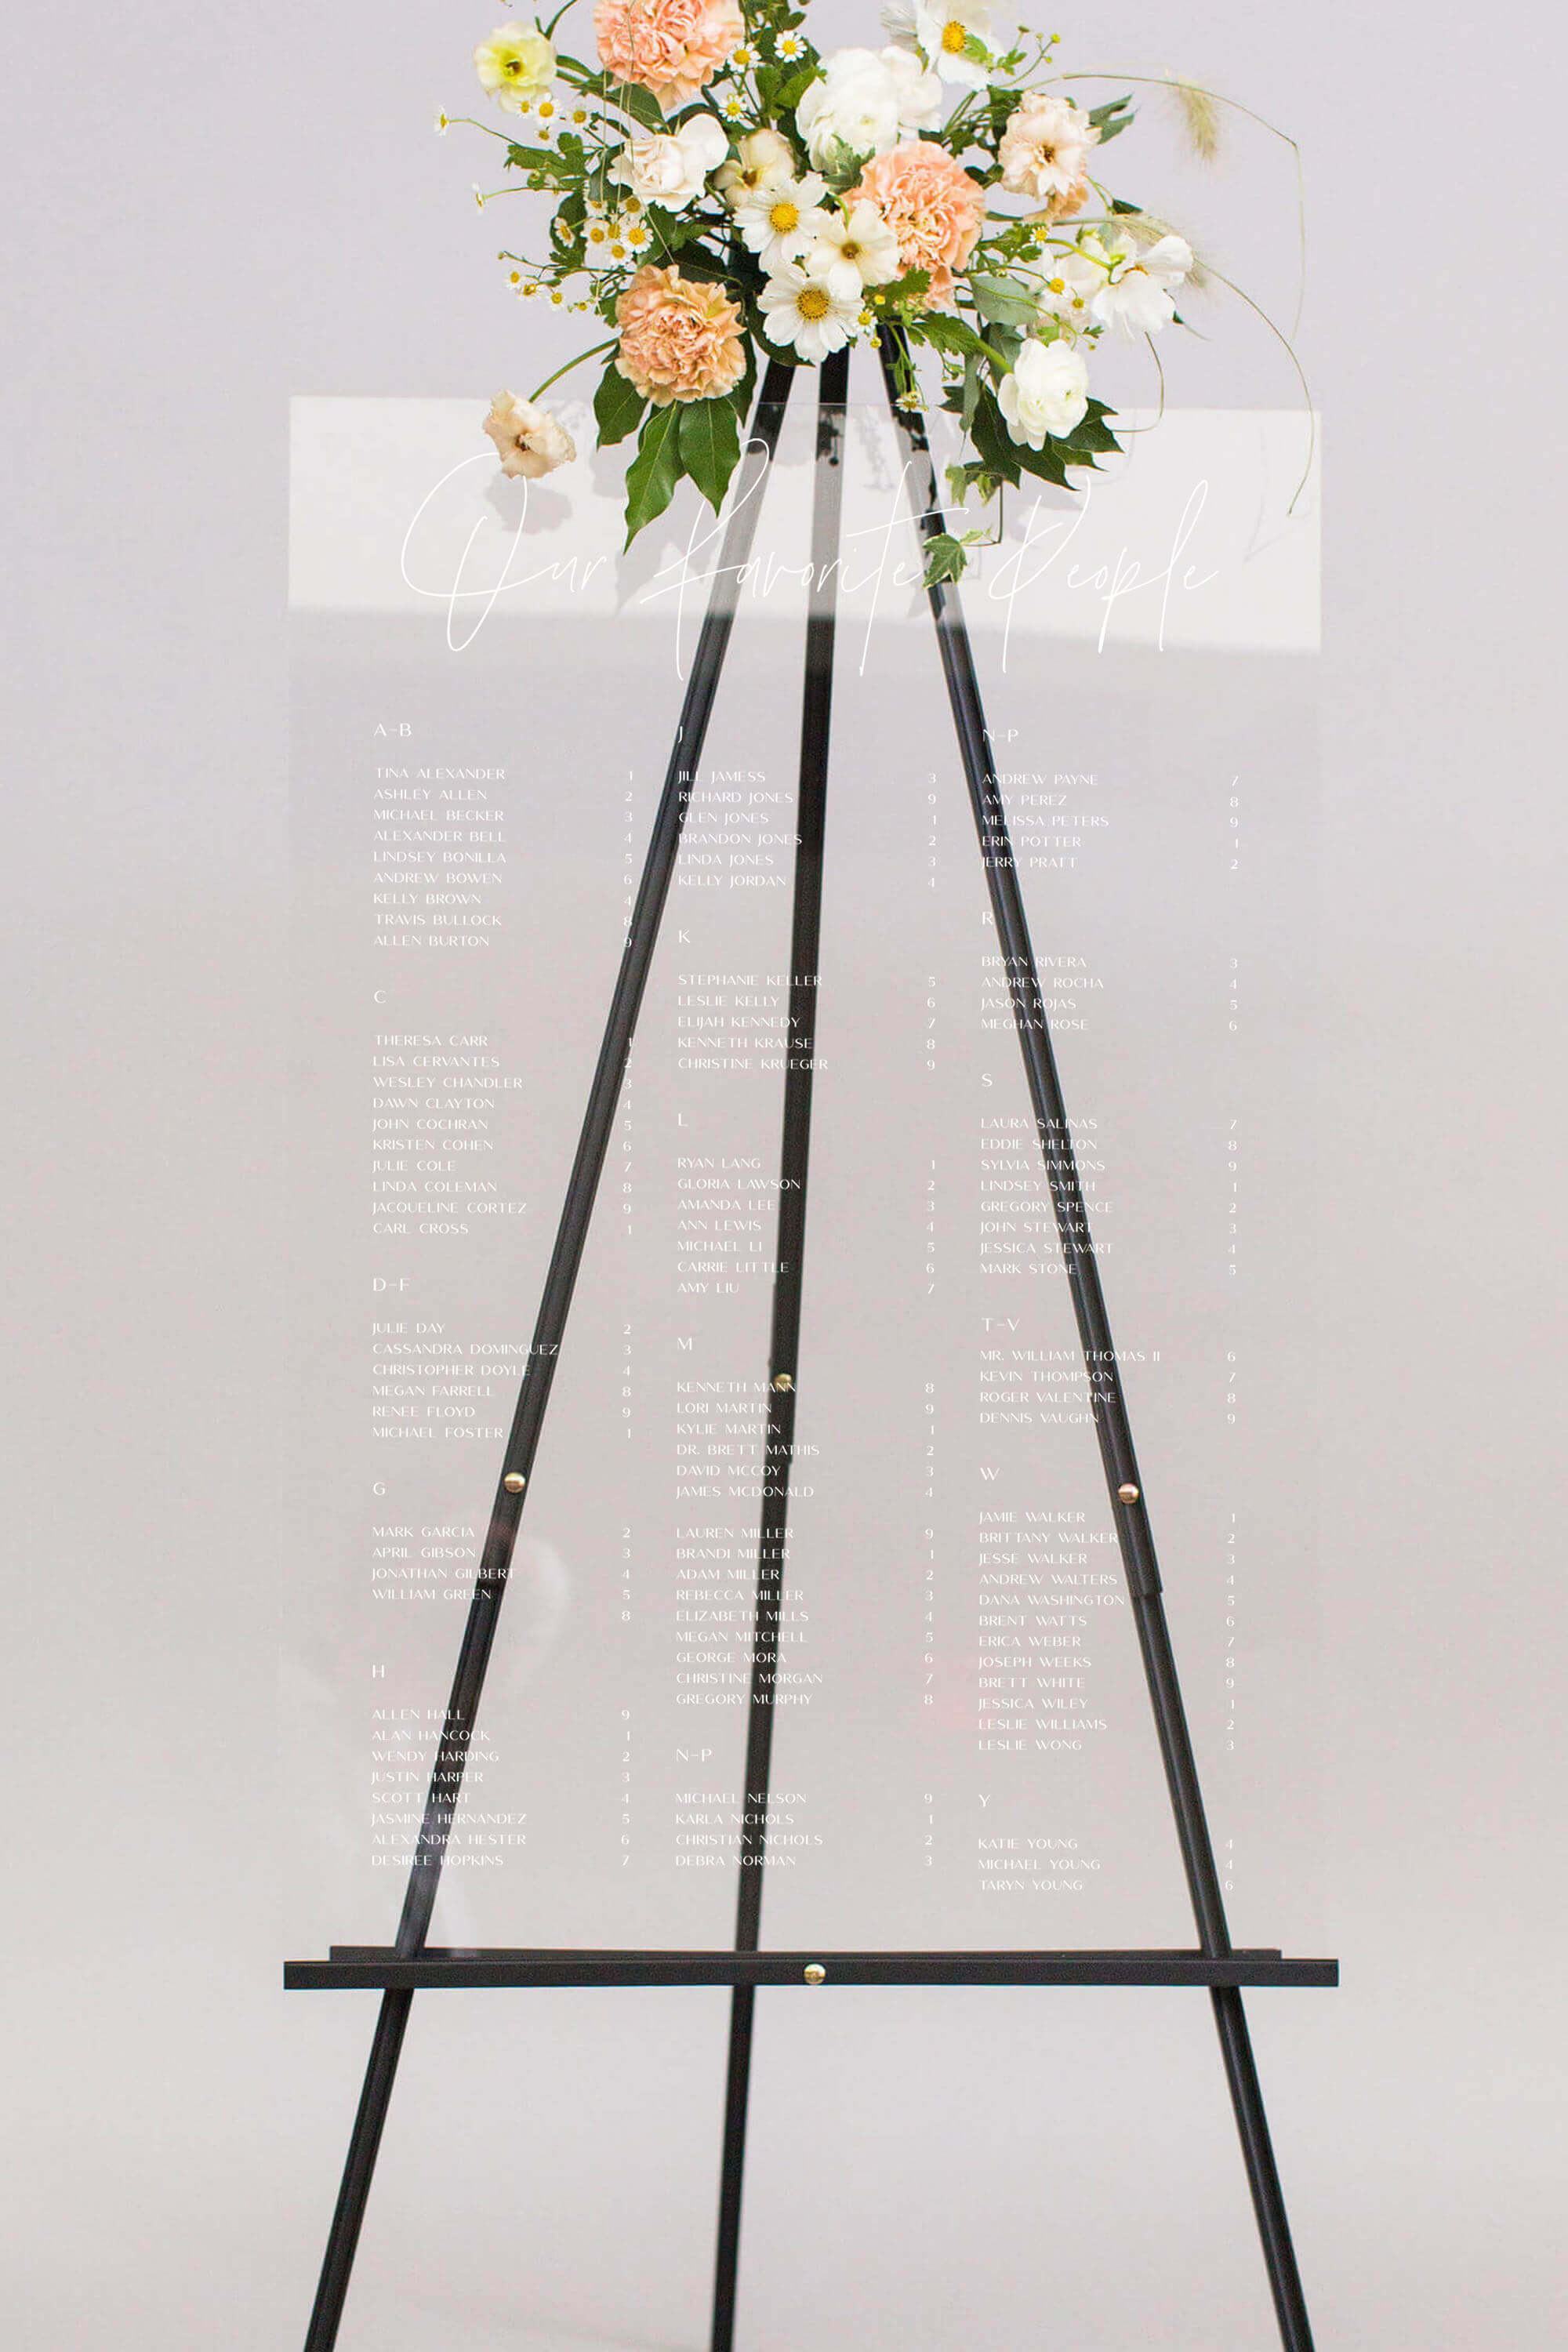 Clear Acrylic Seating Chart Wedding Lily Roe Co.